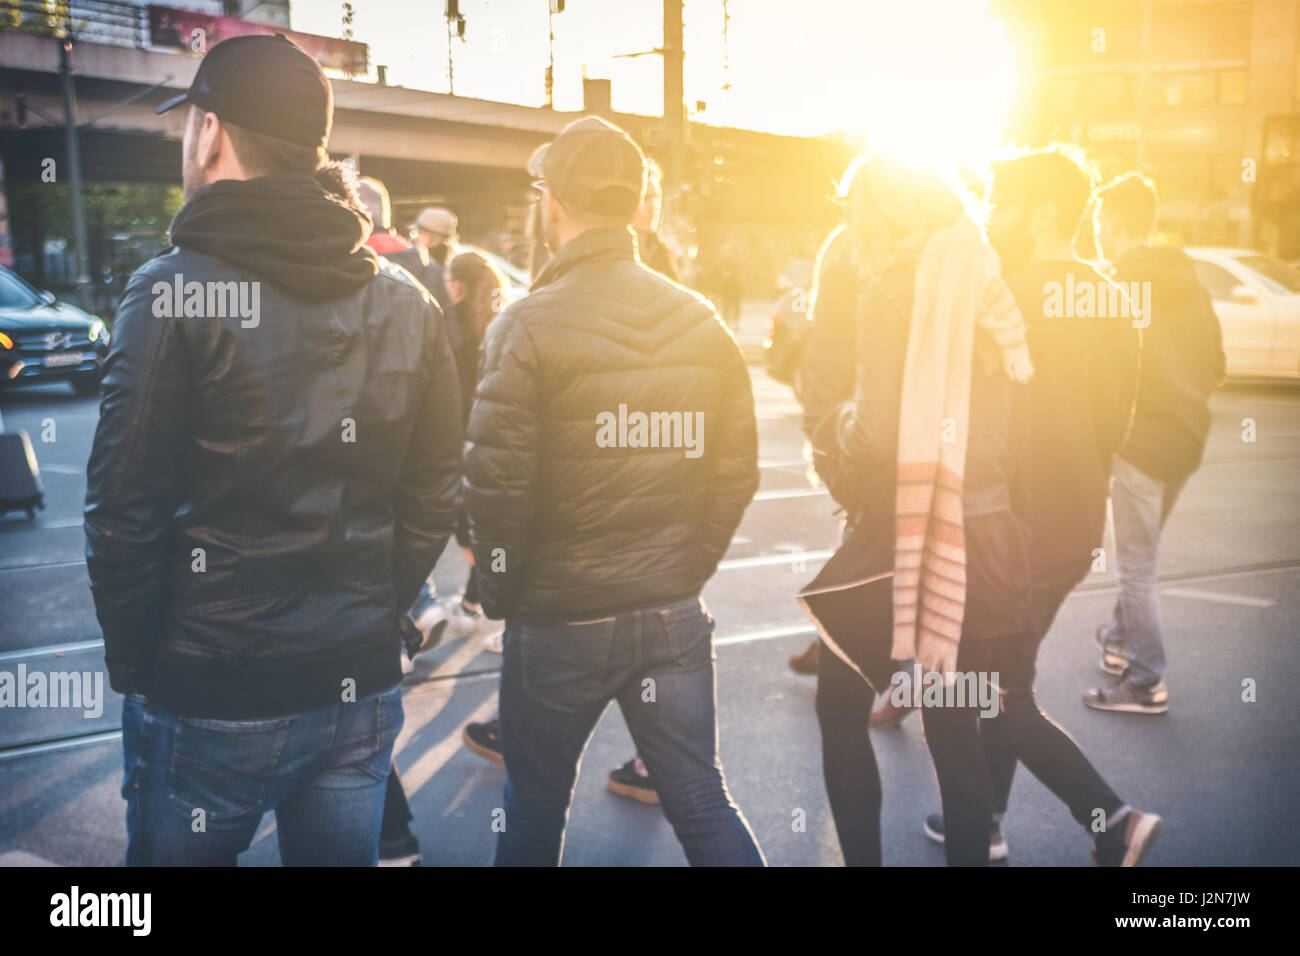 group of young people walking on street - friends crossing street together Stock Photo